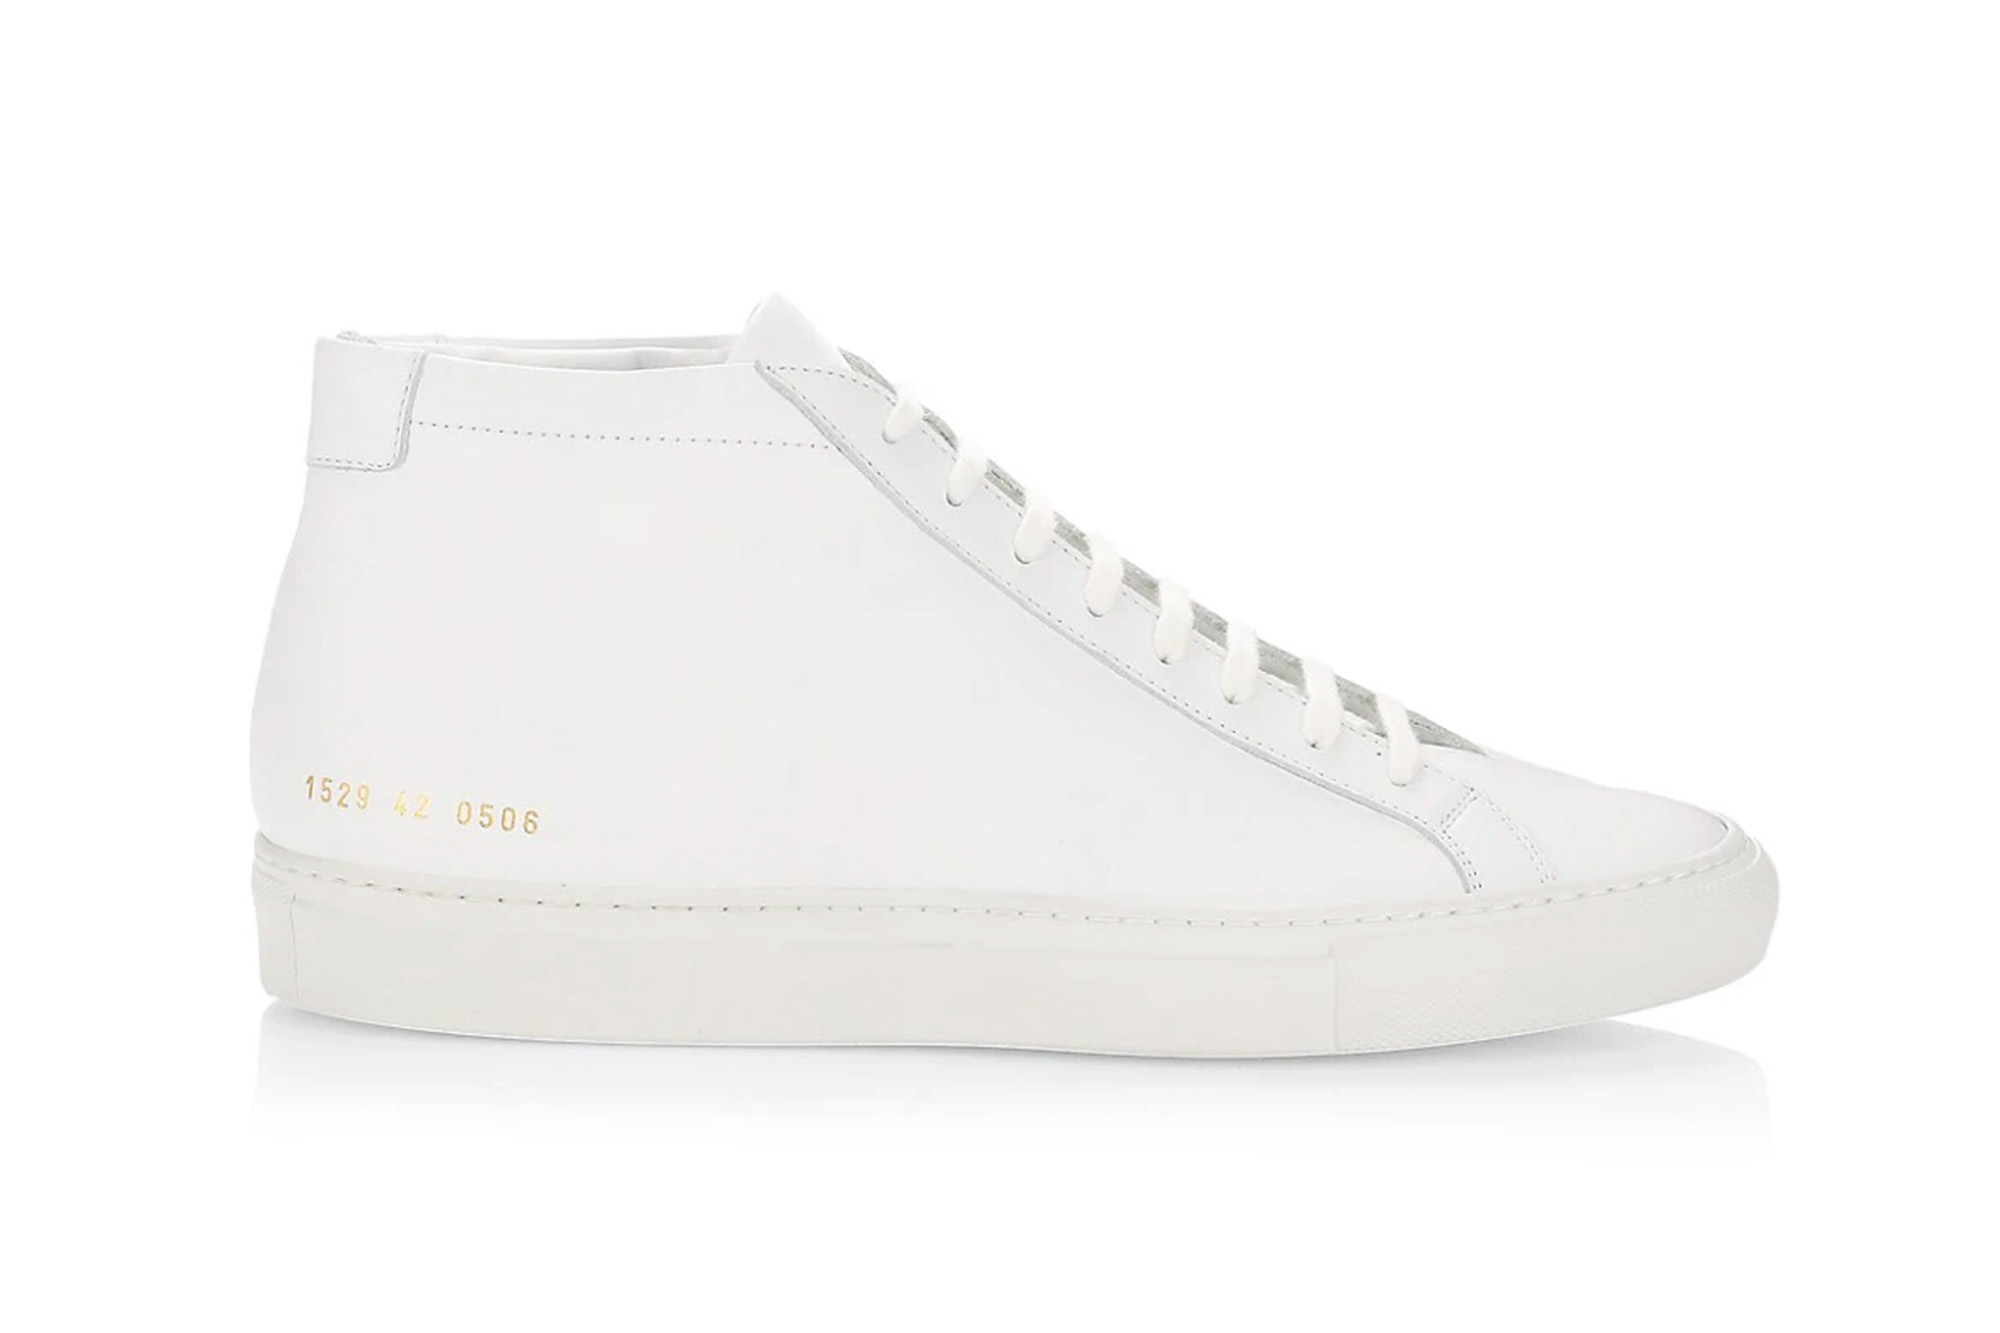 A white leather sneaker